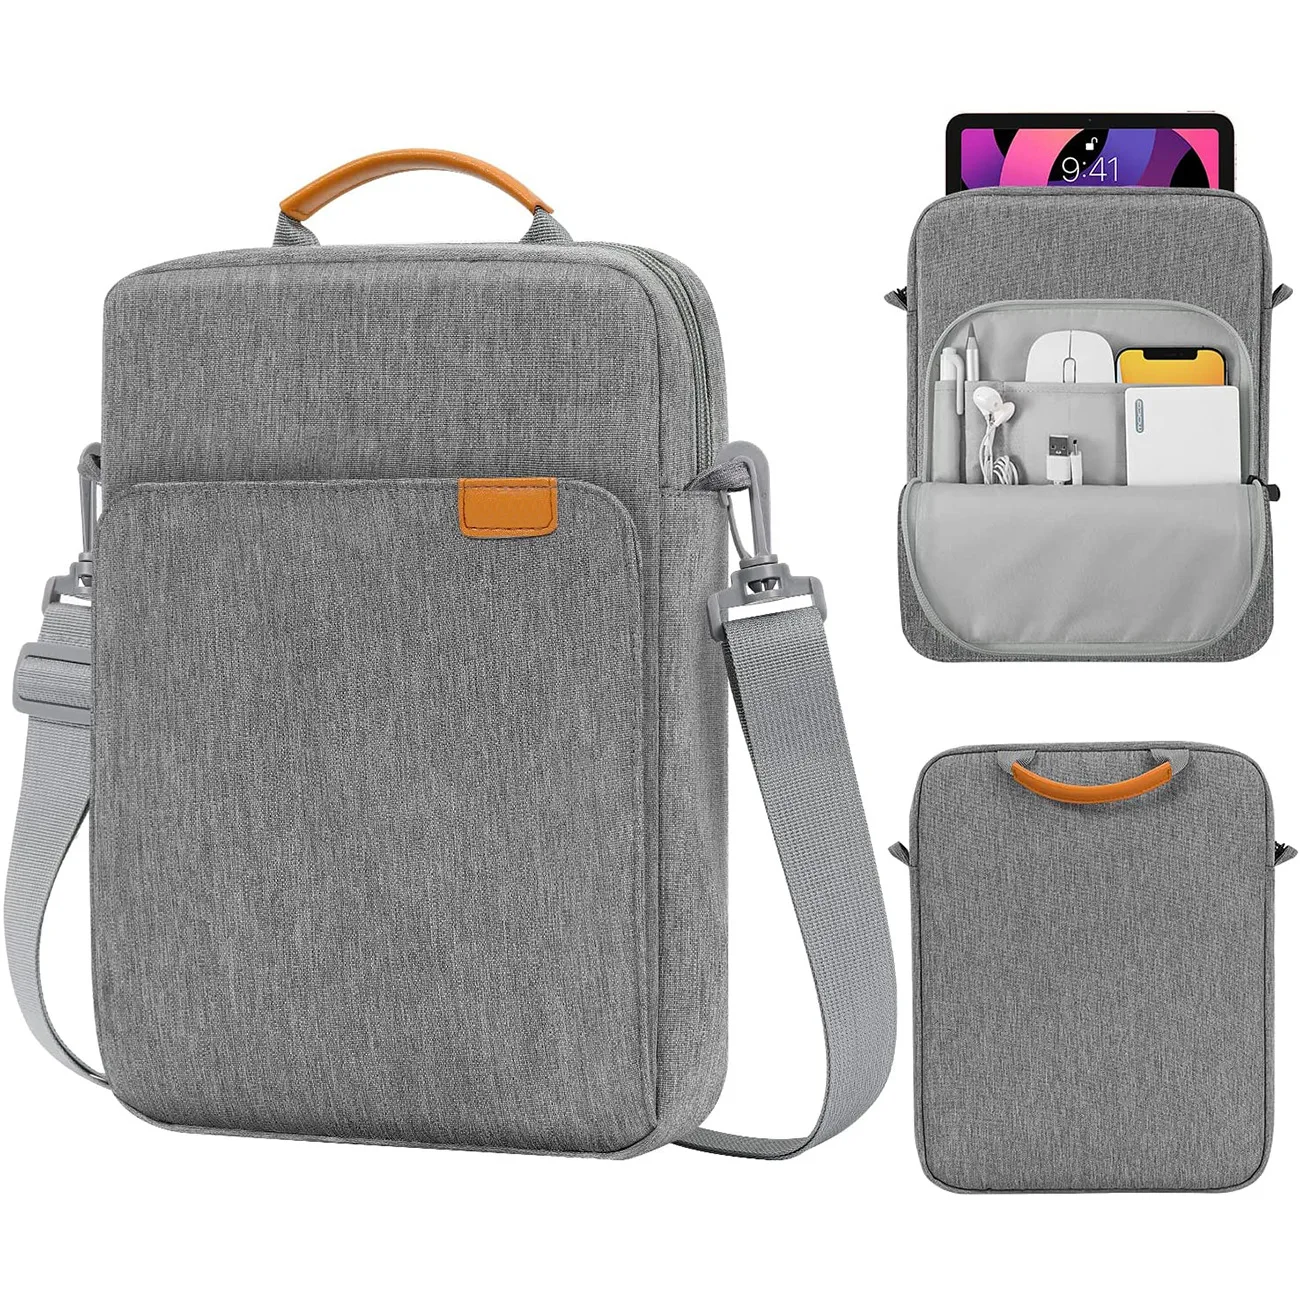 

New Laptop Bag Cross-body Bag for IPad Pro 11 10.2 9.7 Inch Tablet Bag for Xiaomi Pad 5 Samsung Tab A8 Messenger Bags Carry Case